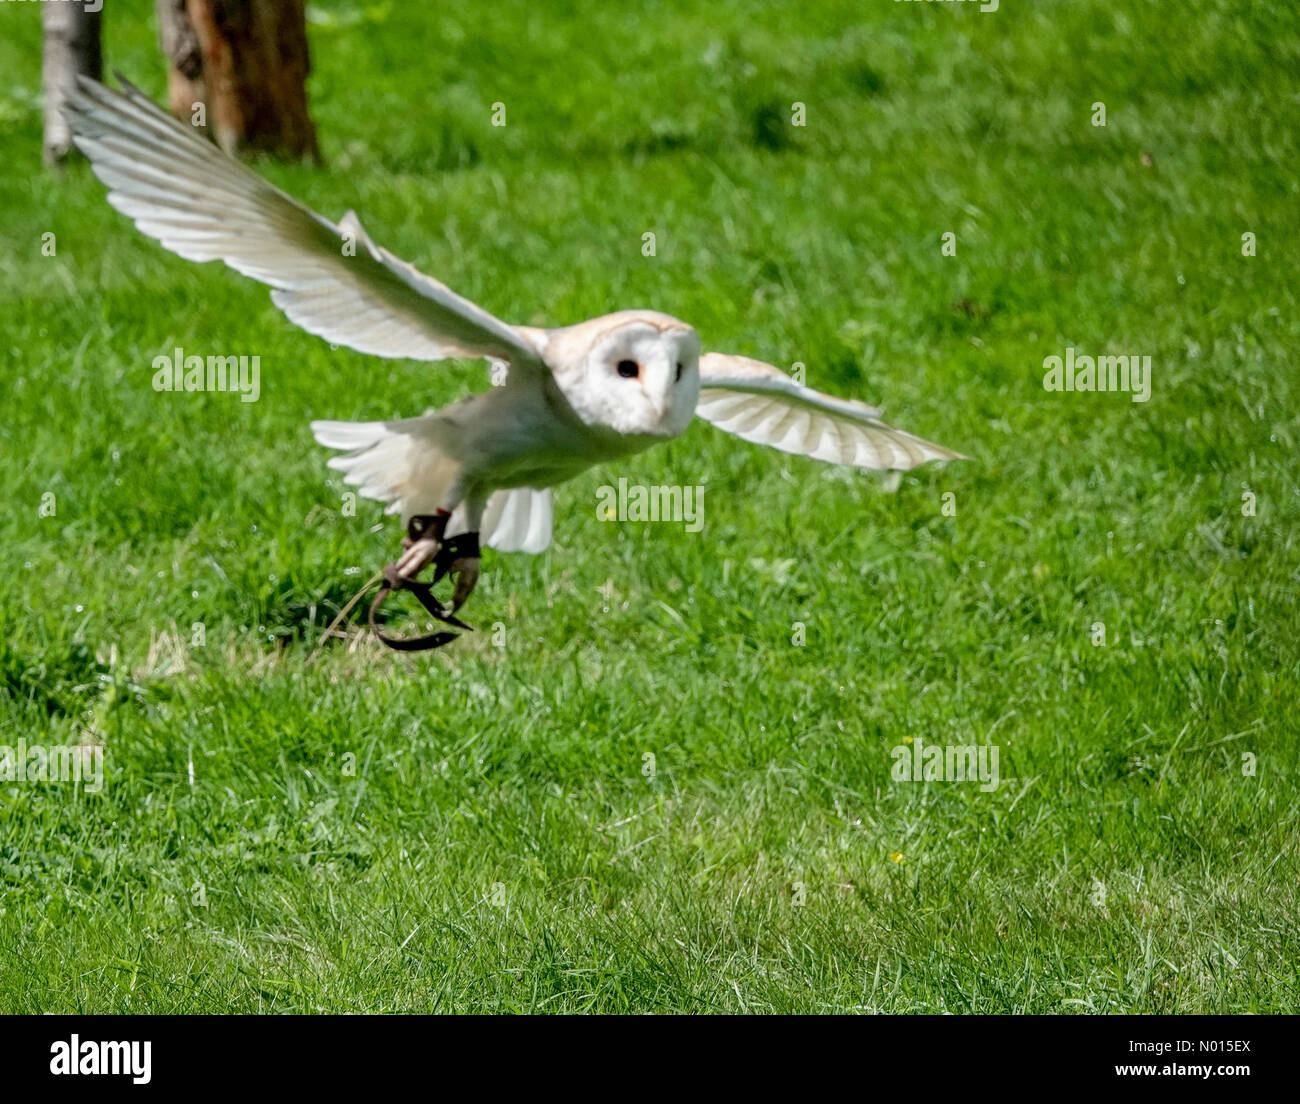 UK Weather: Sunny intervals in Kent. Wildwood Trust, Herne. 07th August 2021. Sunny intervals between the showers across Kent. A barn owl in flight at Wildwood near Canterbury in Kent. Credit: jamesjagger/StockimoNews/Alamy Live News Stock Photo